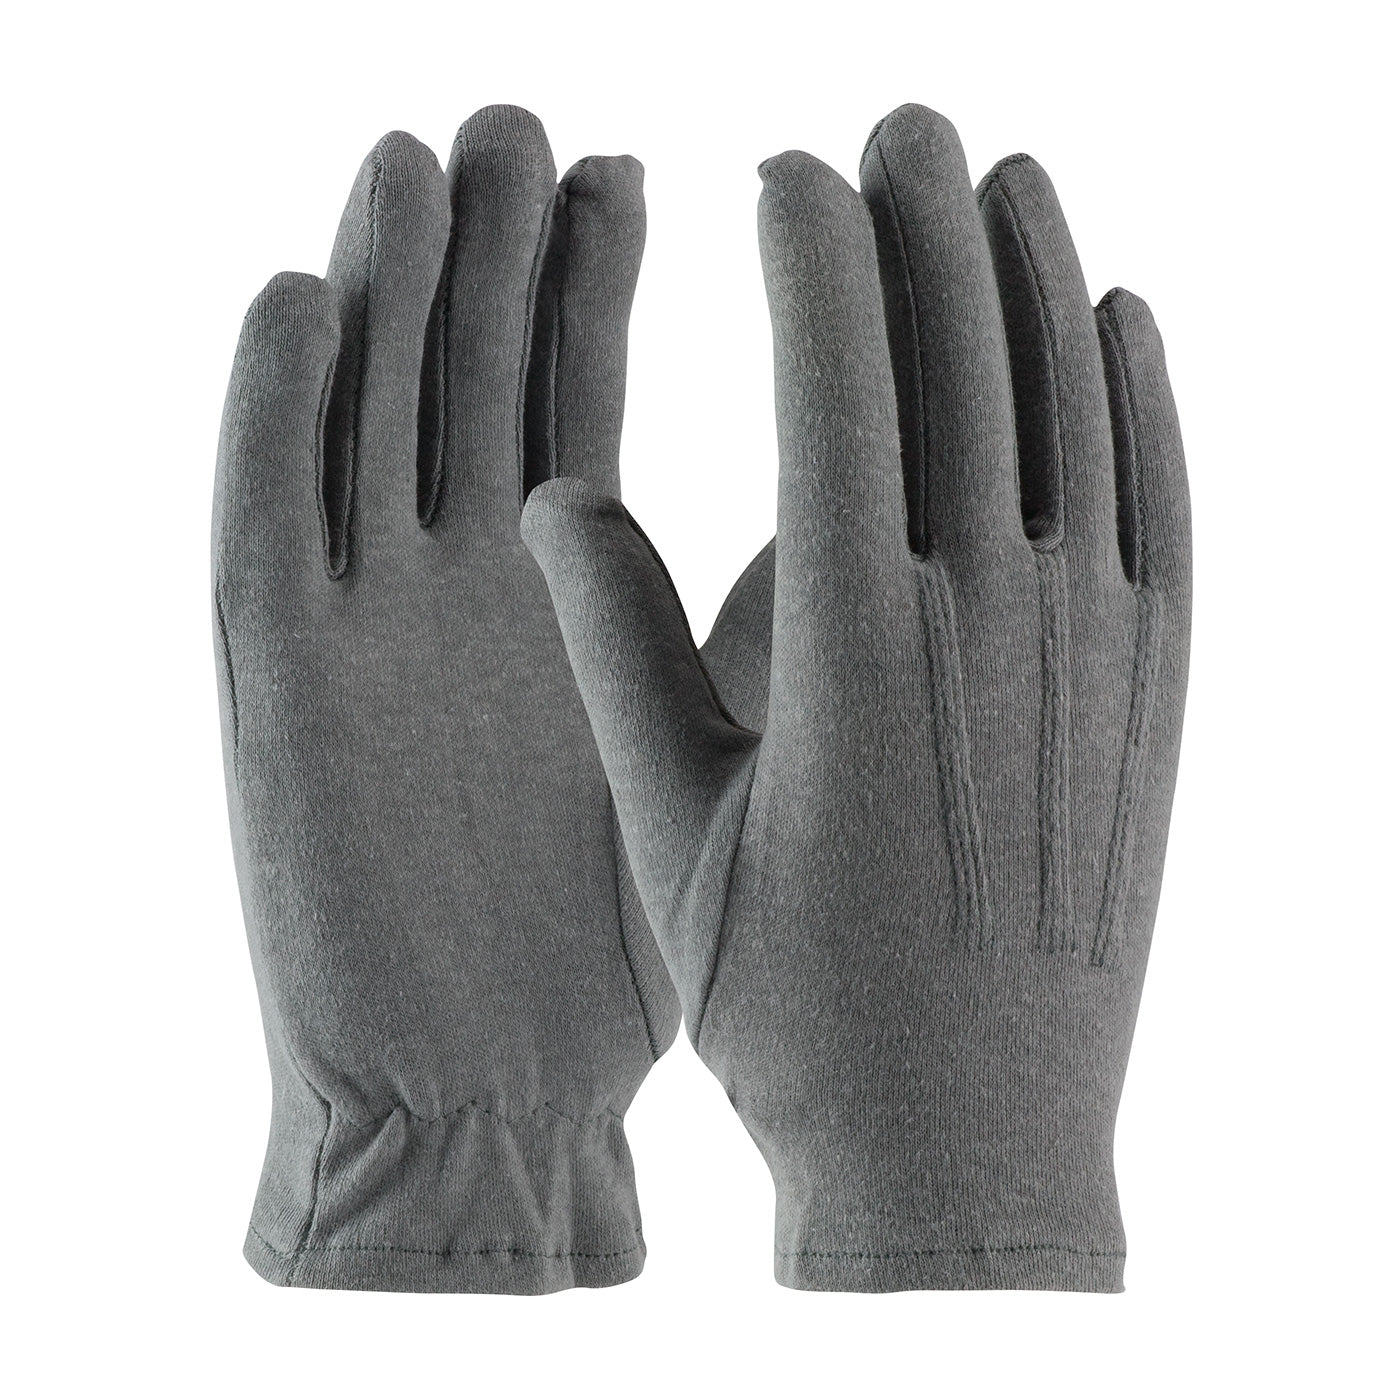 Protective Industrial Products-100% COTTON GRAY DRESS GLOVE